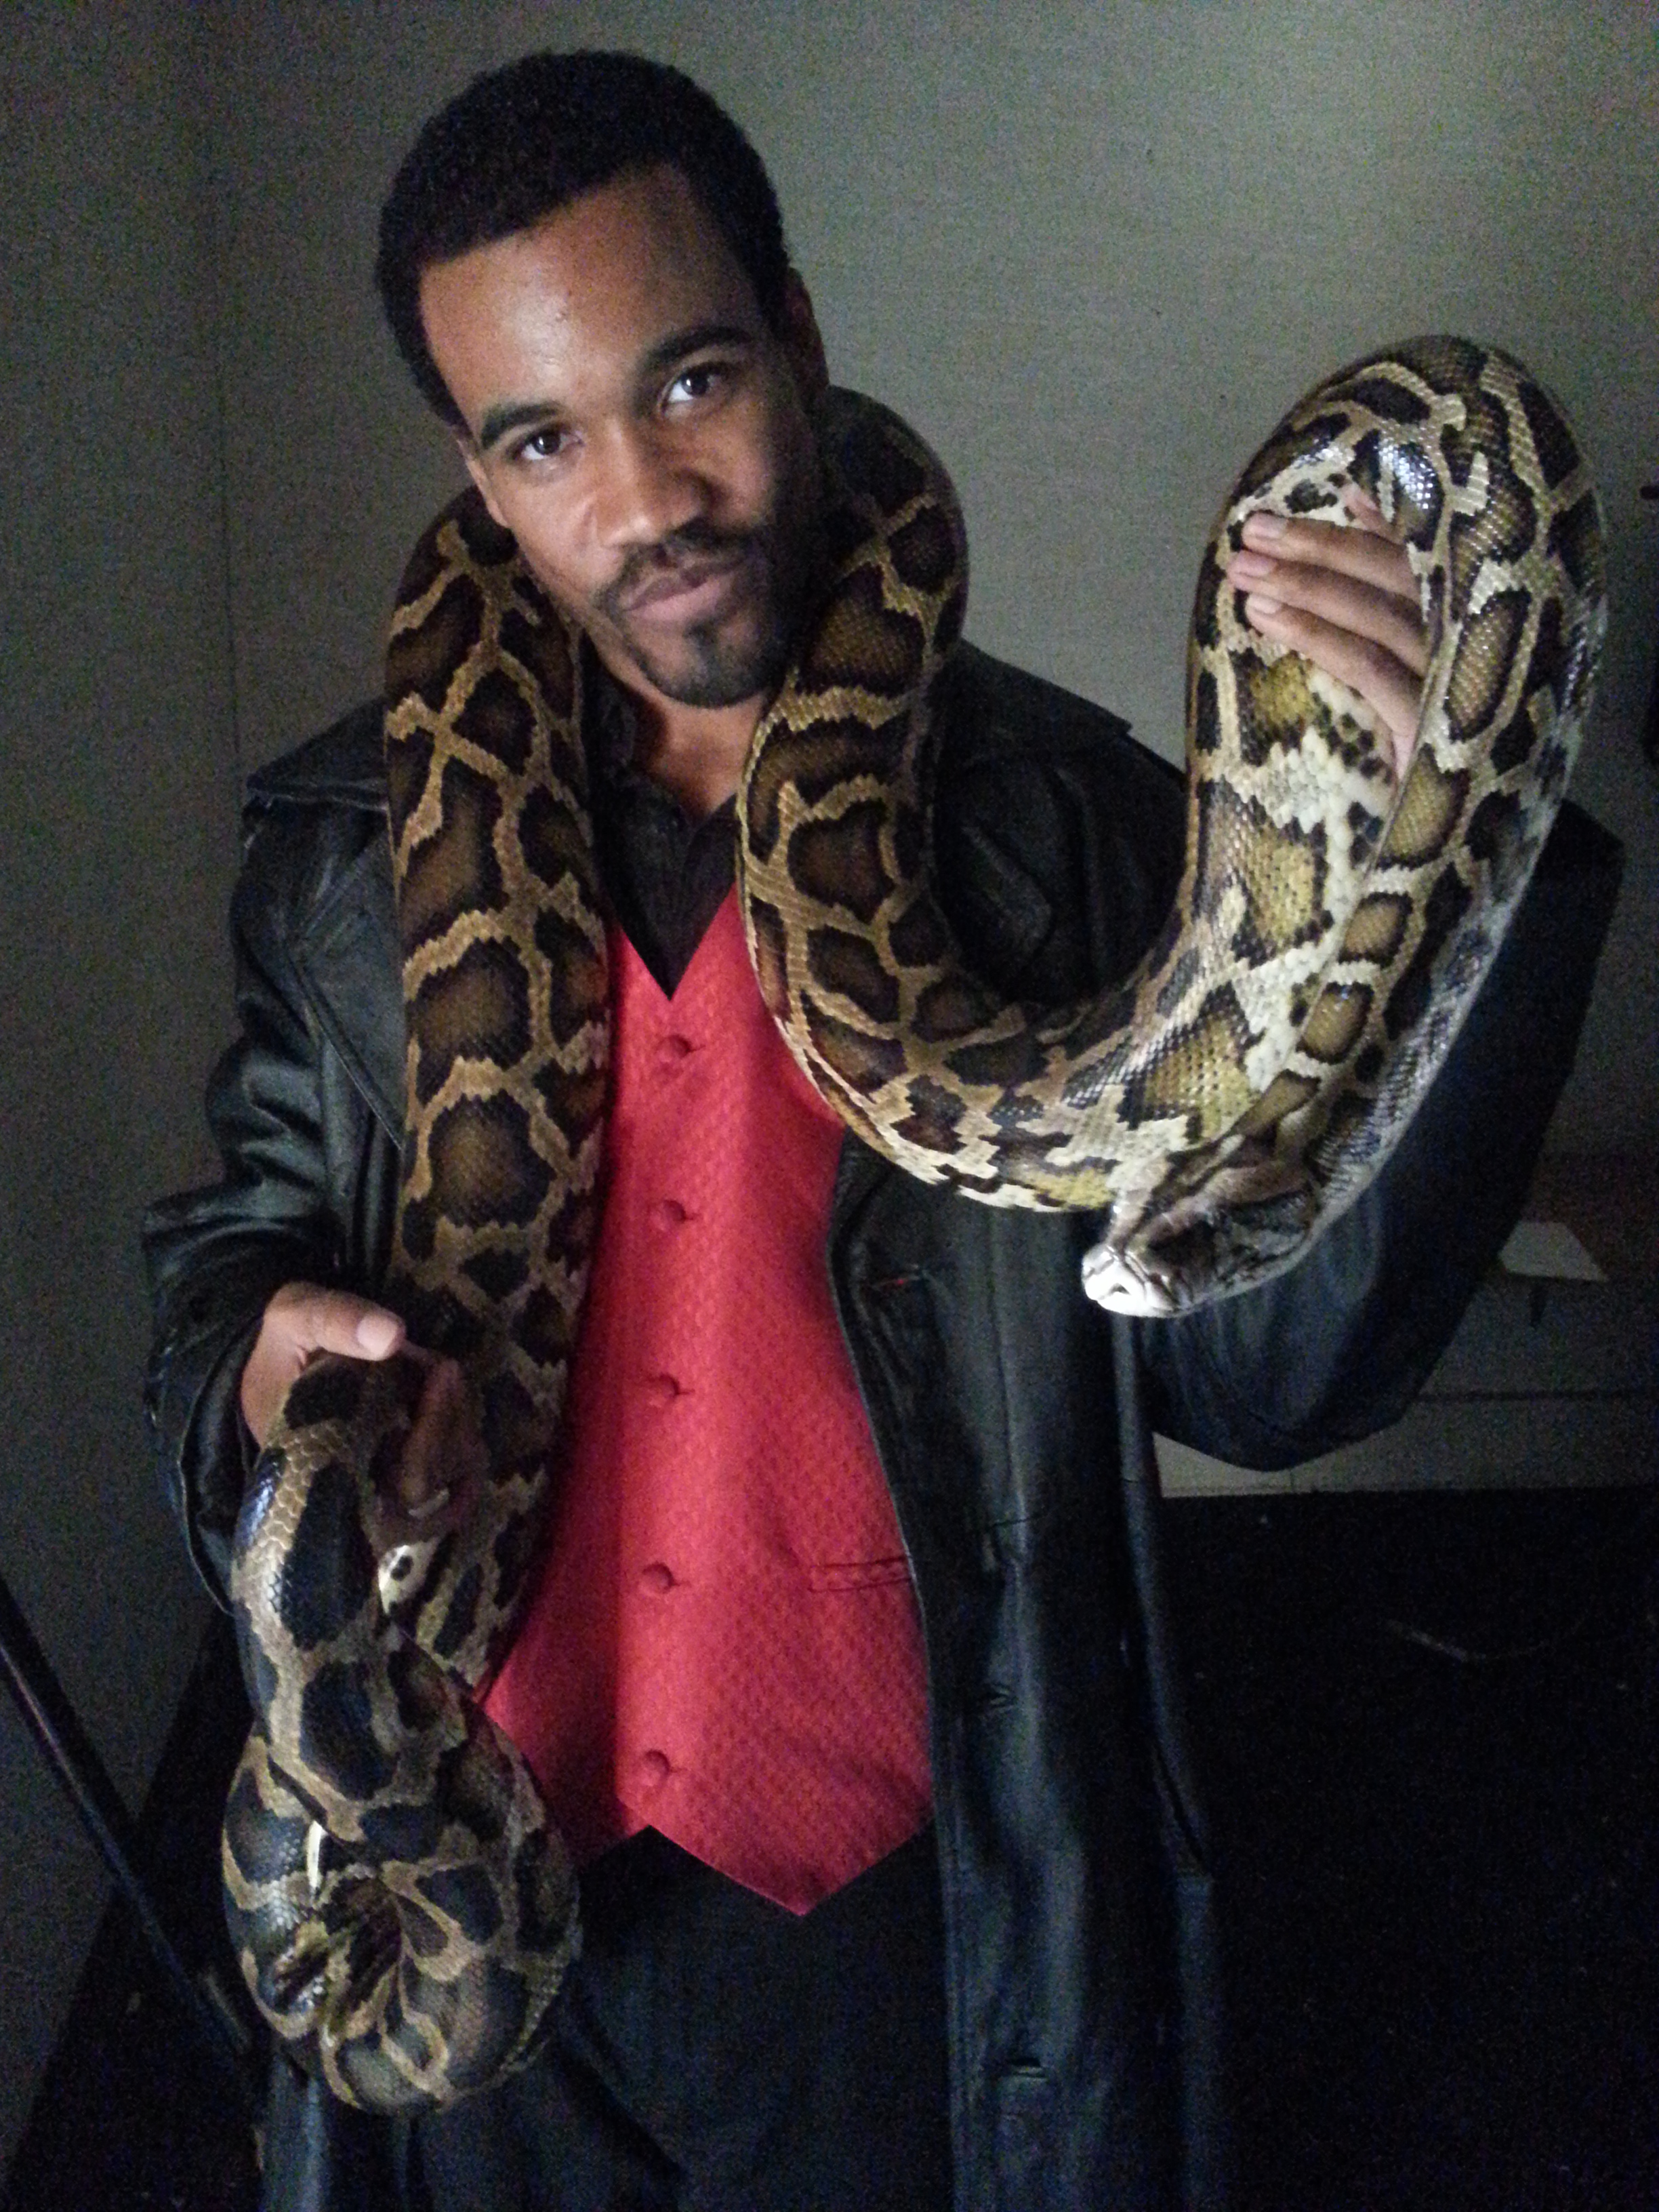 I work with snakes